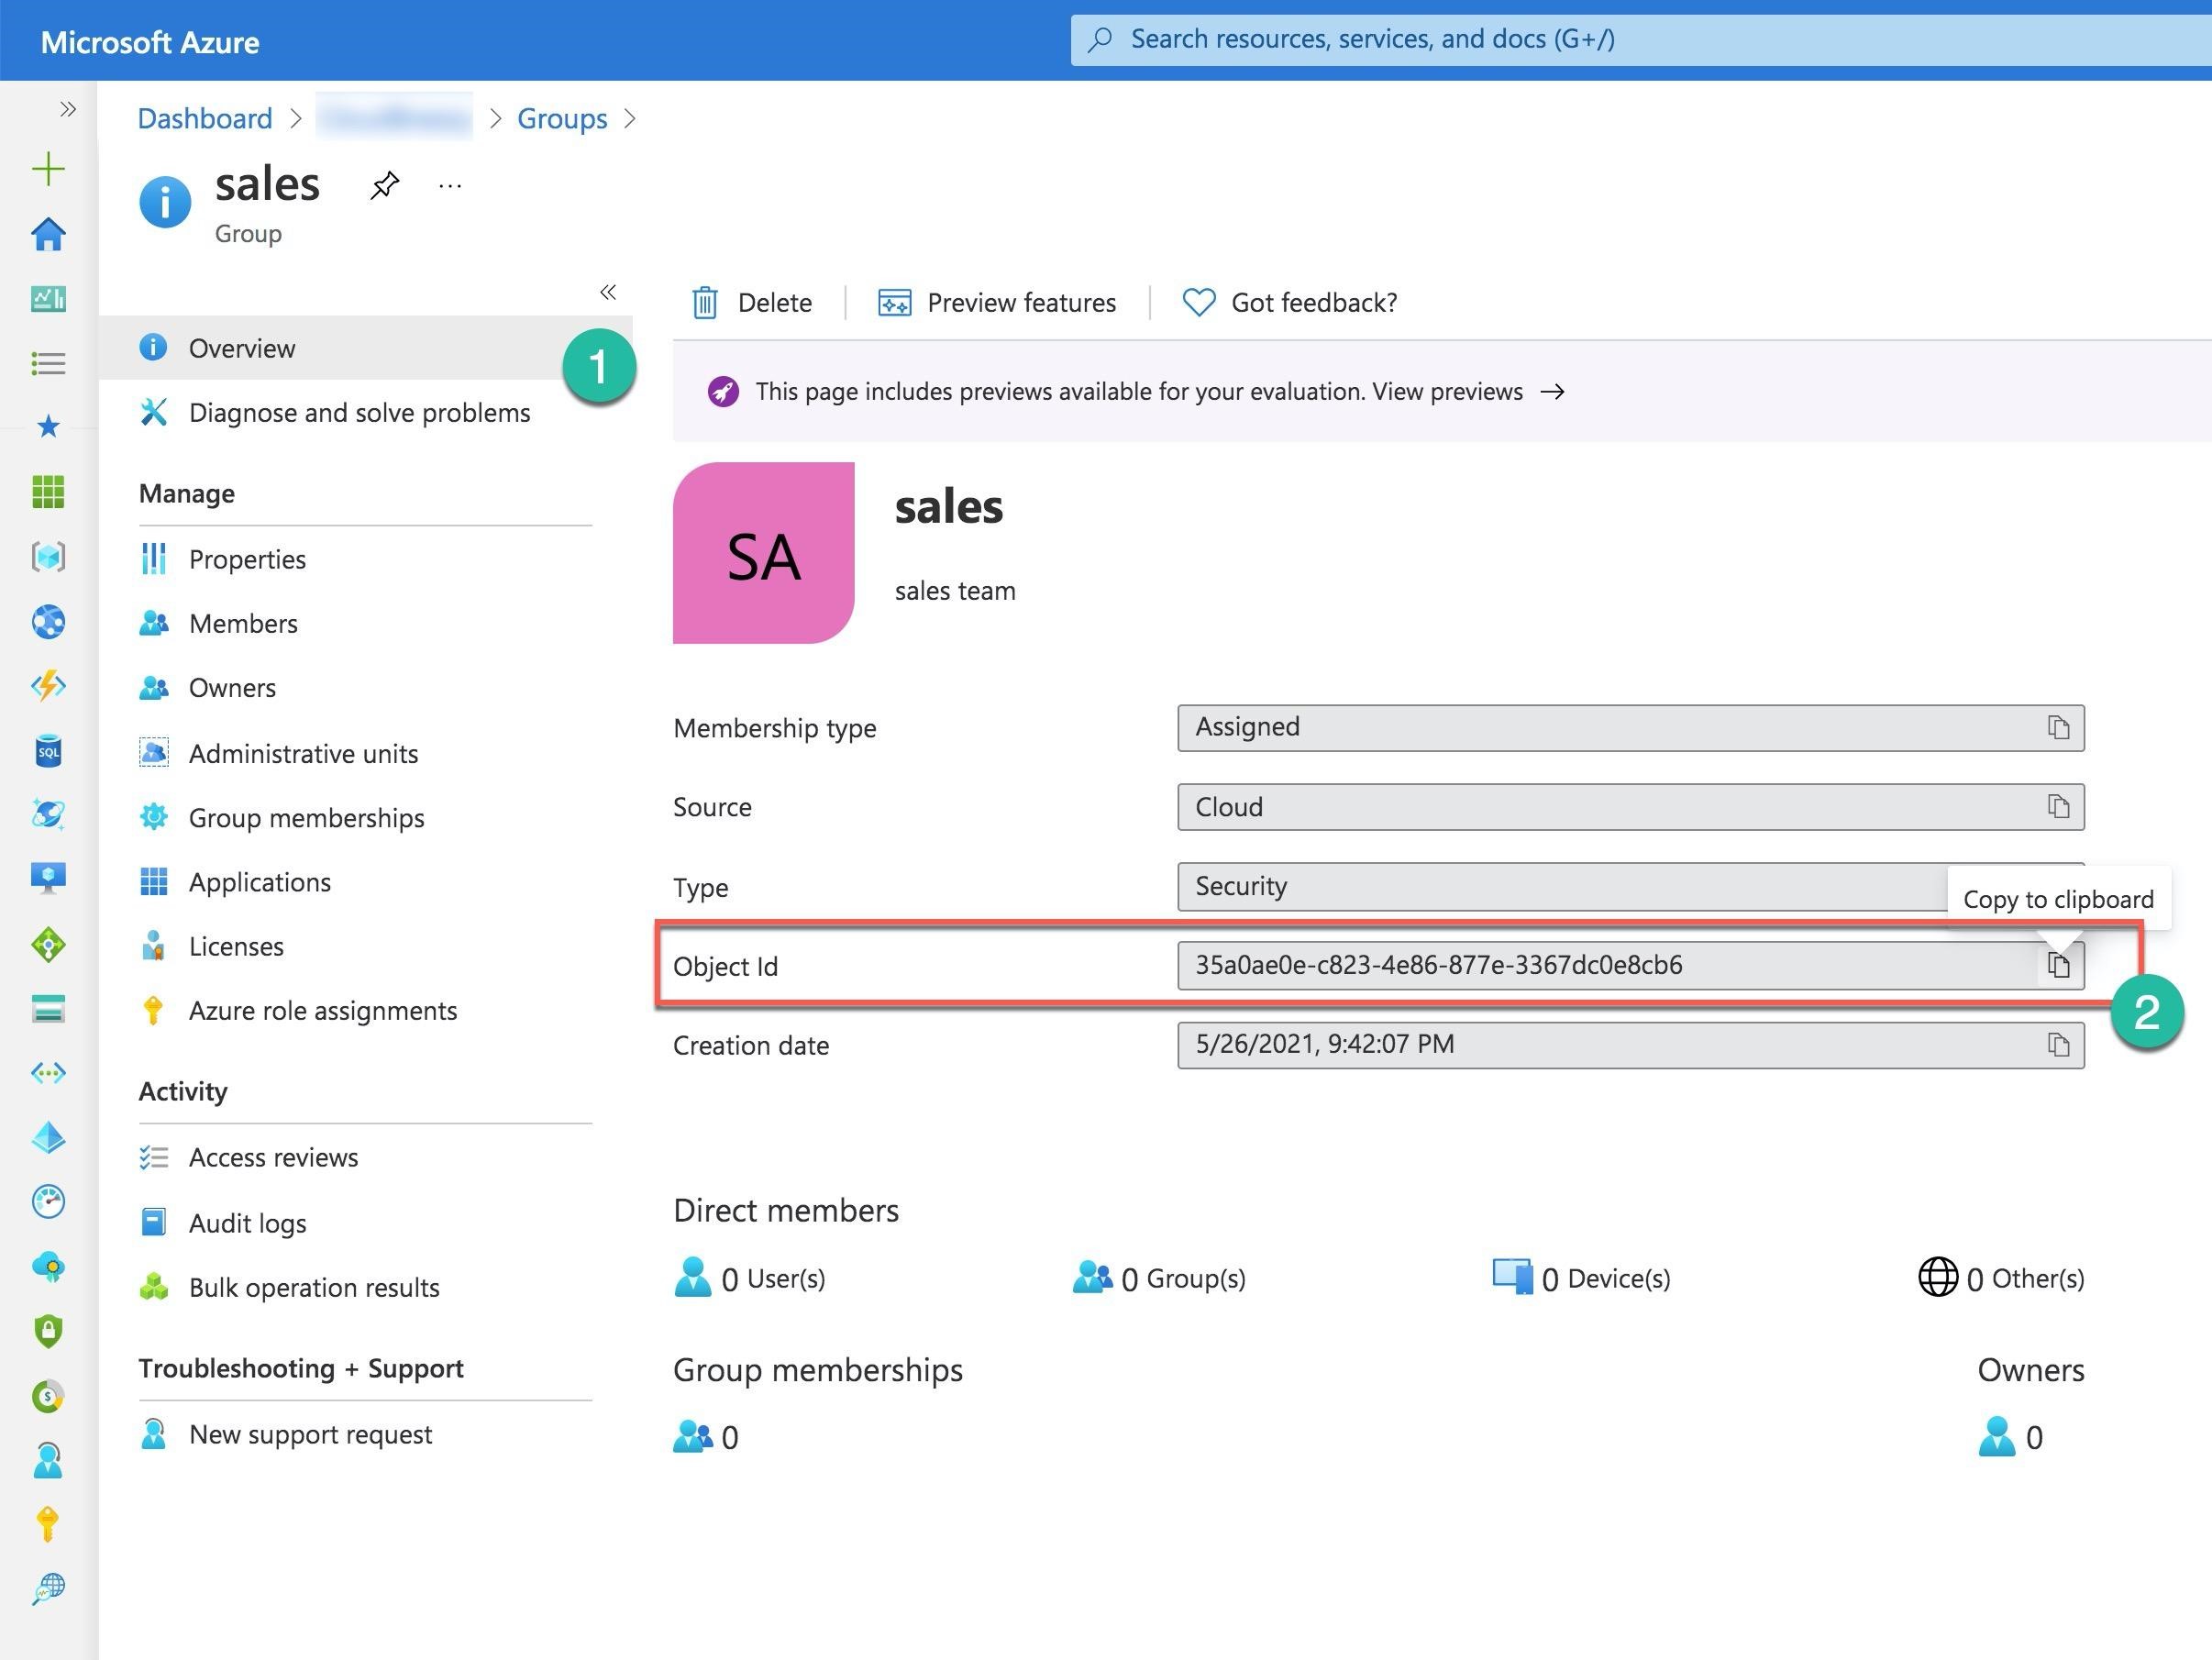 Microsoft Azure © Search resources, services, and docs (G+/)

22 Dashboard > > Groups >

+ o sales *
R Group

whi « il] Delete %z| Preview features QD Got feedback?
= @ Overview
i . (¥) This page includes previews available for your evaluation. View previews
a Diagnose and solve problems
f Manage
= sales
(s) il Properties
sales team
Members
Owners
Membership type Assigned ny

Administrative units
@ 1% Group memberships Source Cloud a)
= a Applications Type oy Copy to clipboard

e .
% ae Seen Object Id 35a0ae0e-c823-4e86-877e-3367dc0e8cb6
= © Azure role assignments
Creation date 5/26/2021, 9:42:07 PM Th

si Activity
® v= Access reviews
iS) Audit logs Direct members
¢ & Bulk operation results a O User(s) EB 0 Group(s) Lil 0 Device(s) ® O Other(s)
© Troubleshooting + Support Group memberships Owners
2 a New support request aa 0 A 0

)